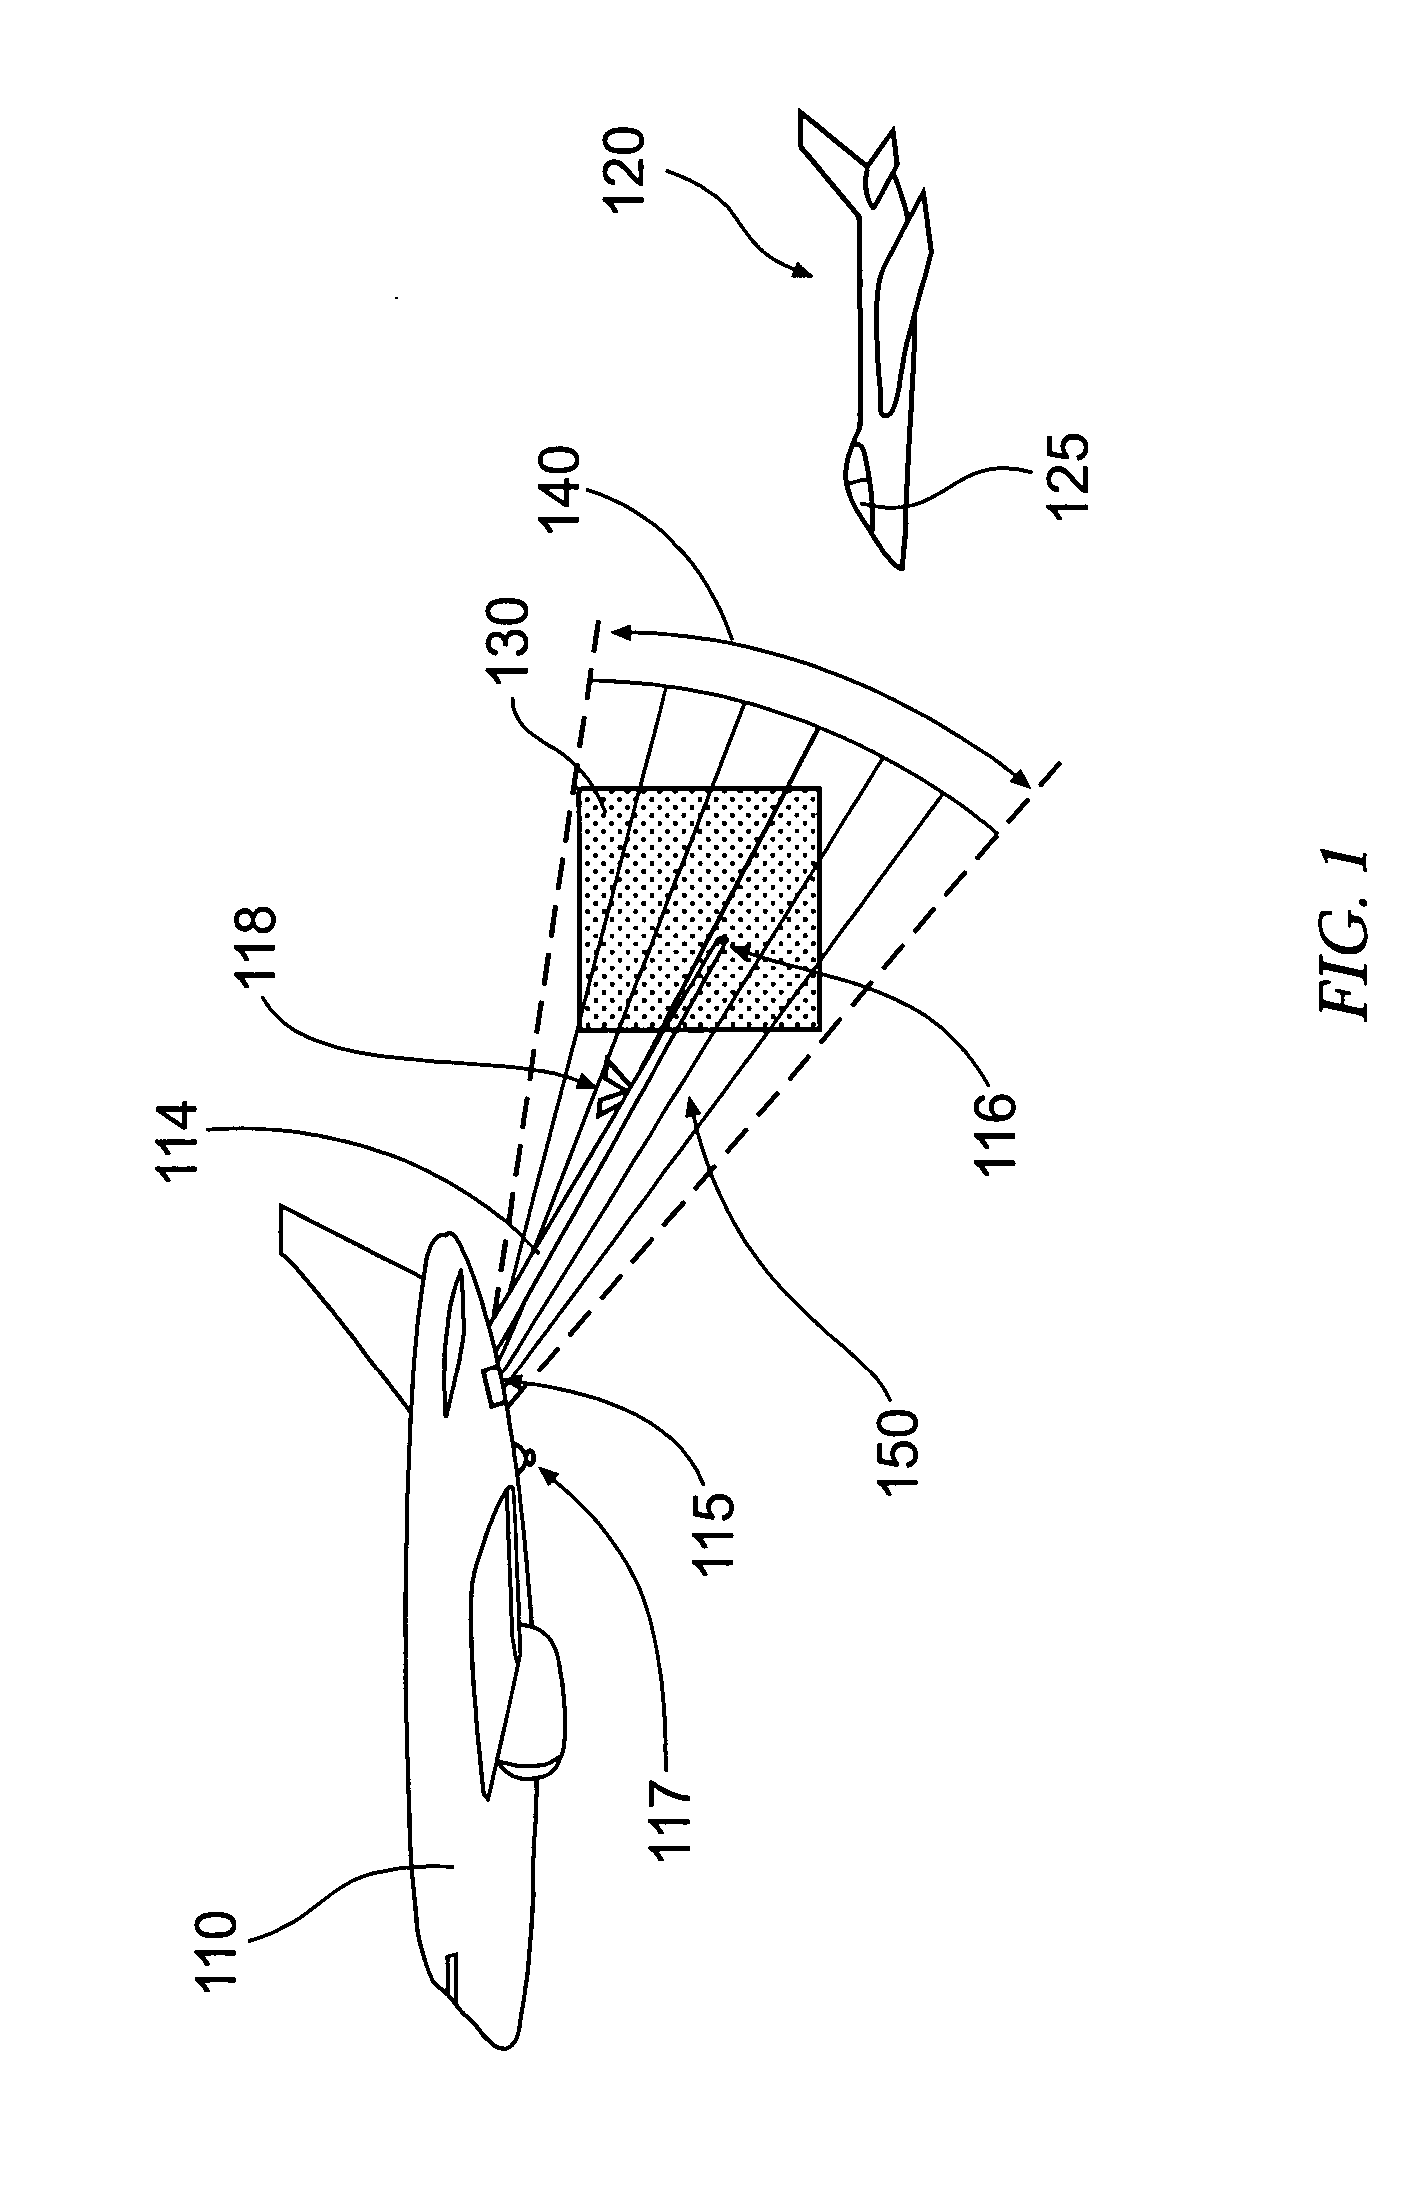 Illuminating system, device, and method for in-flight refueling